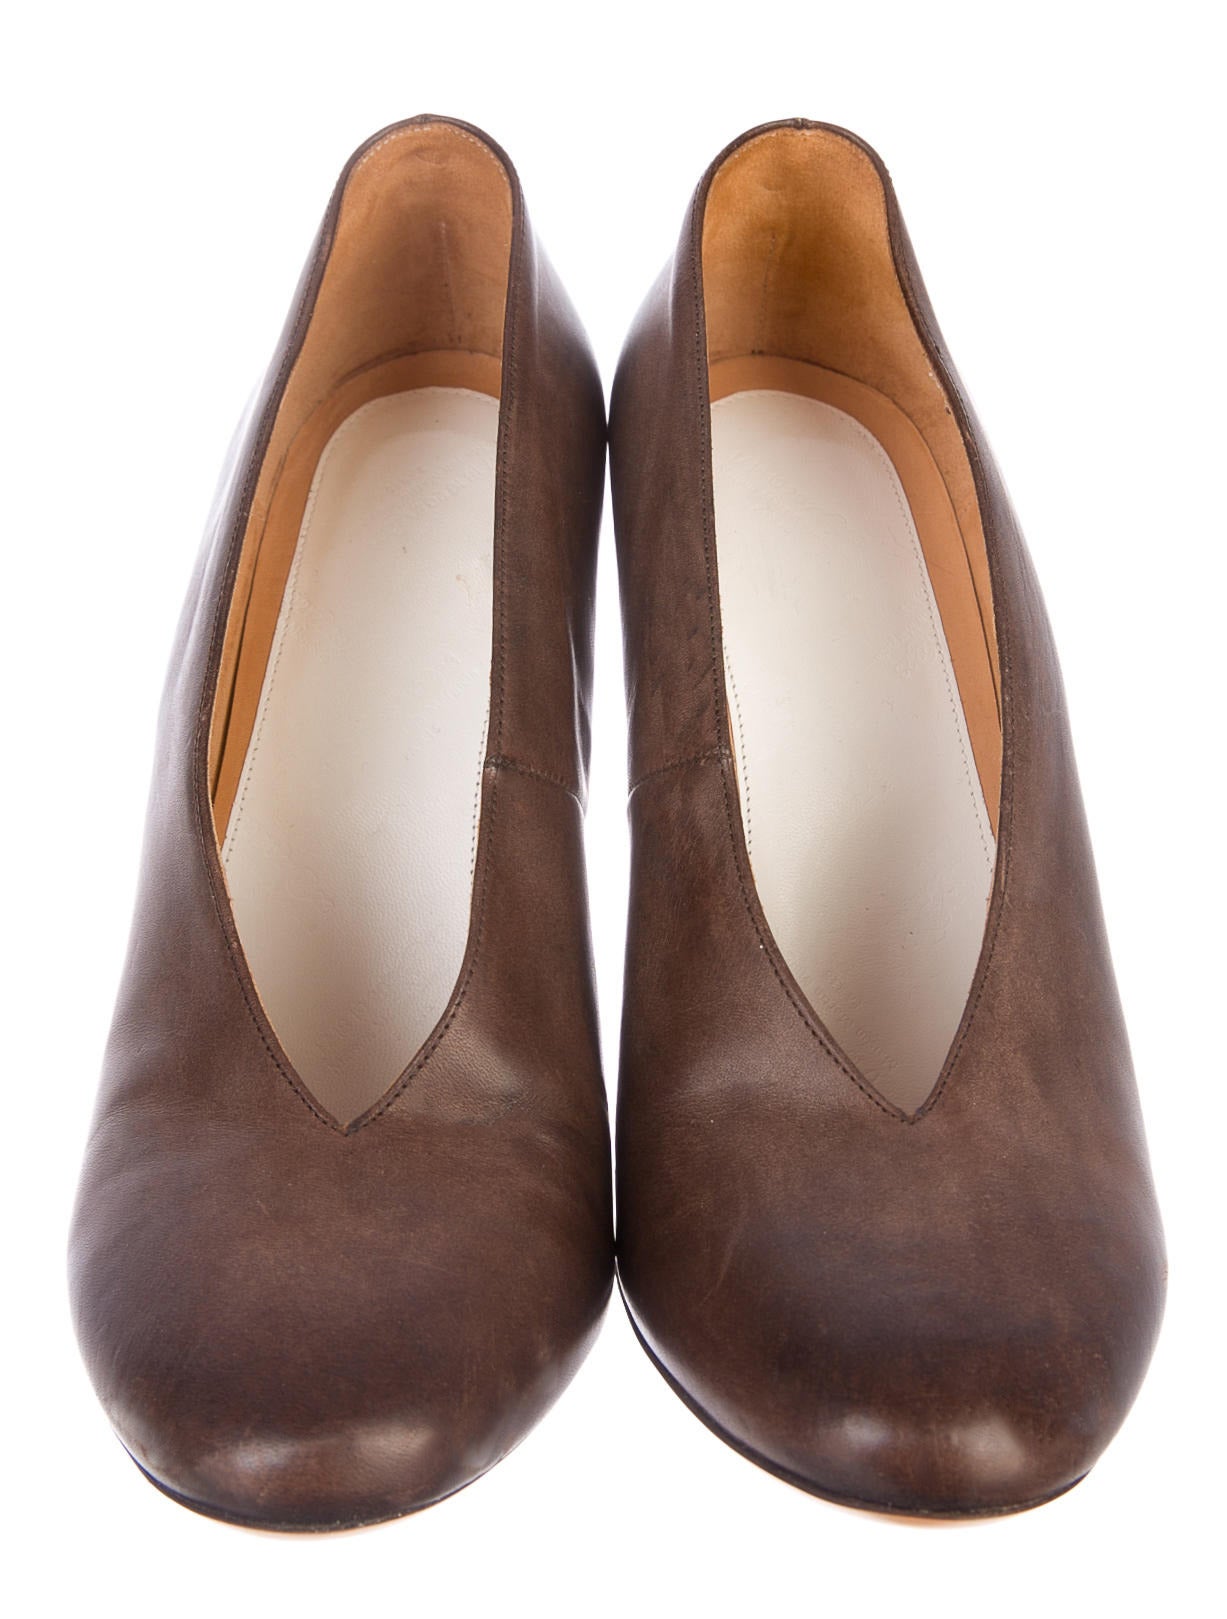 Maison Martin Margiela Brown Leather Pumps, IT 40 In Excellent Condition For Sale In Bethesda, MD